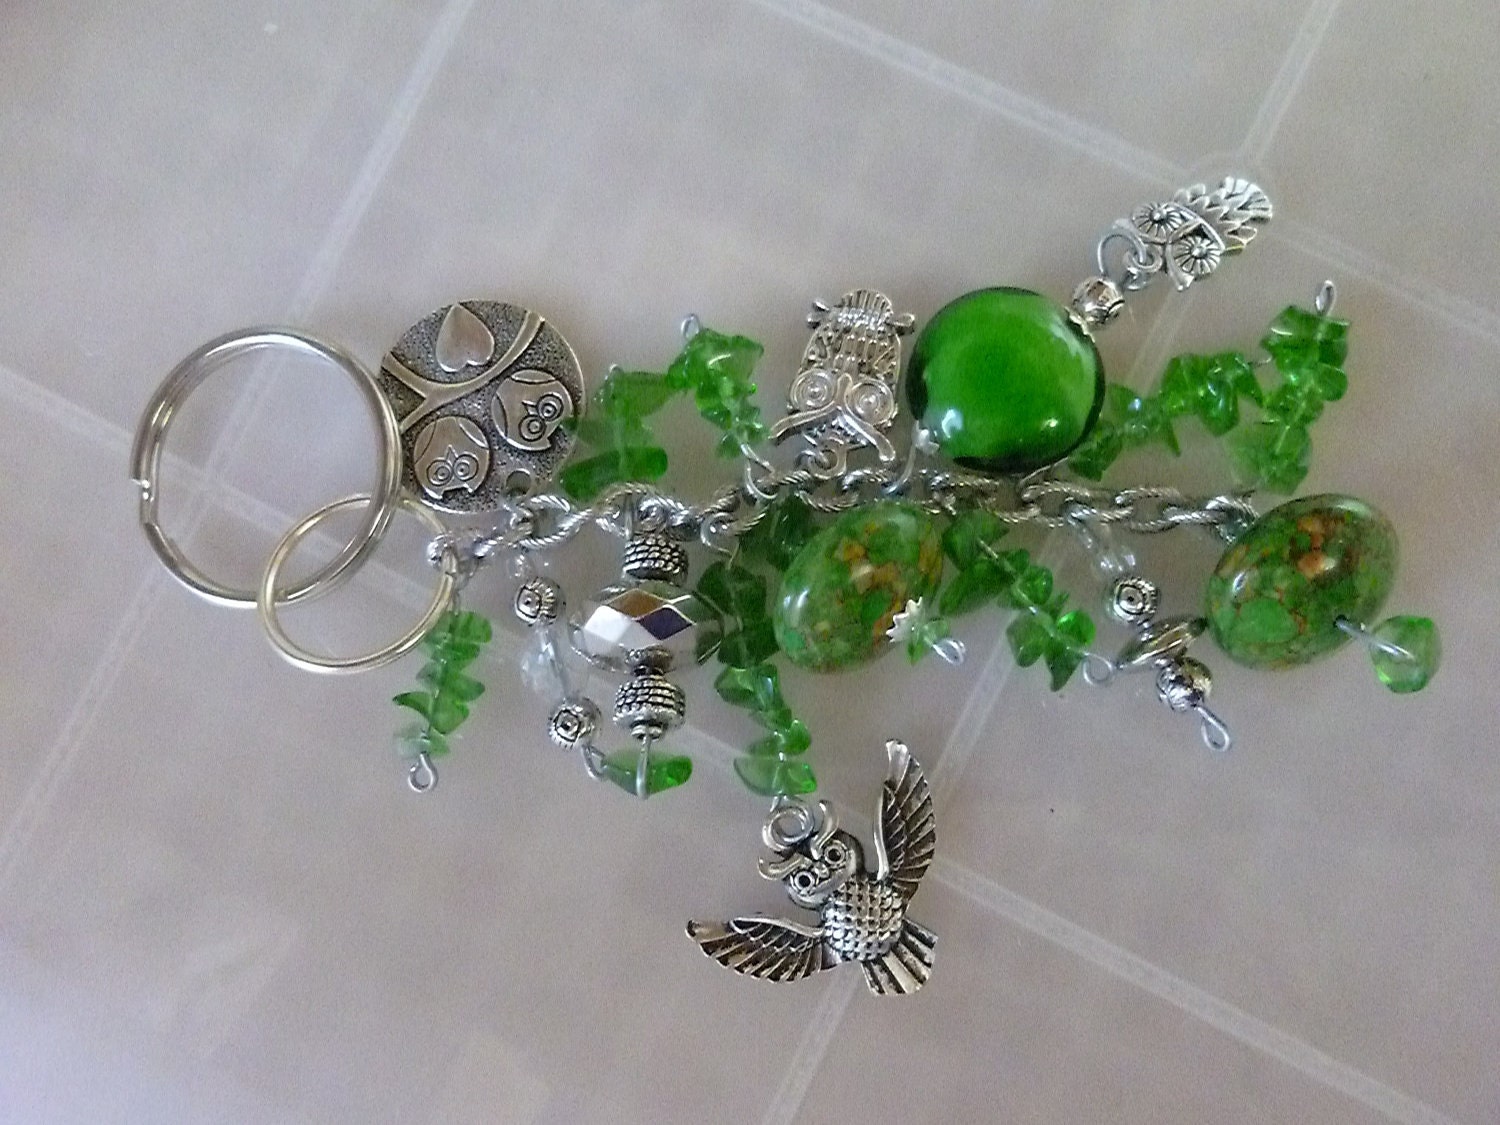 5 inch Owl Chunky Bling Keychain with Metal and Glass Beads - dangle